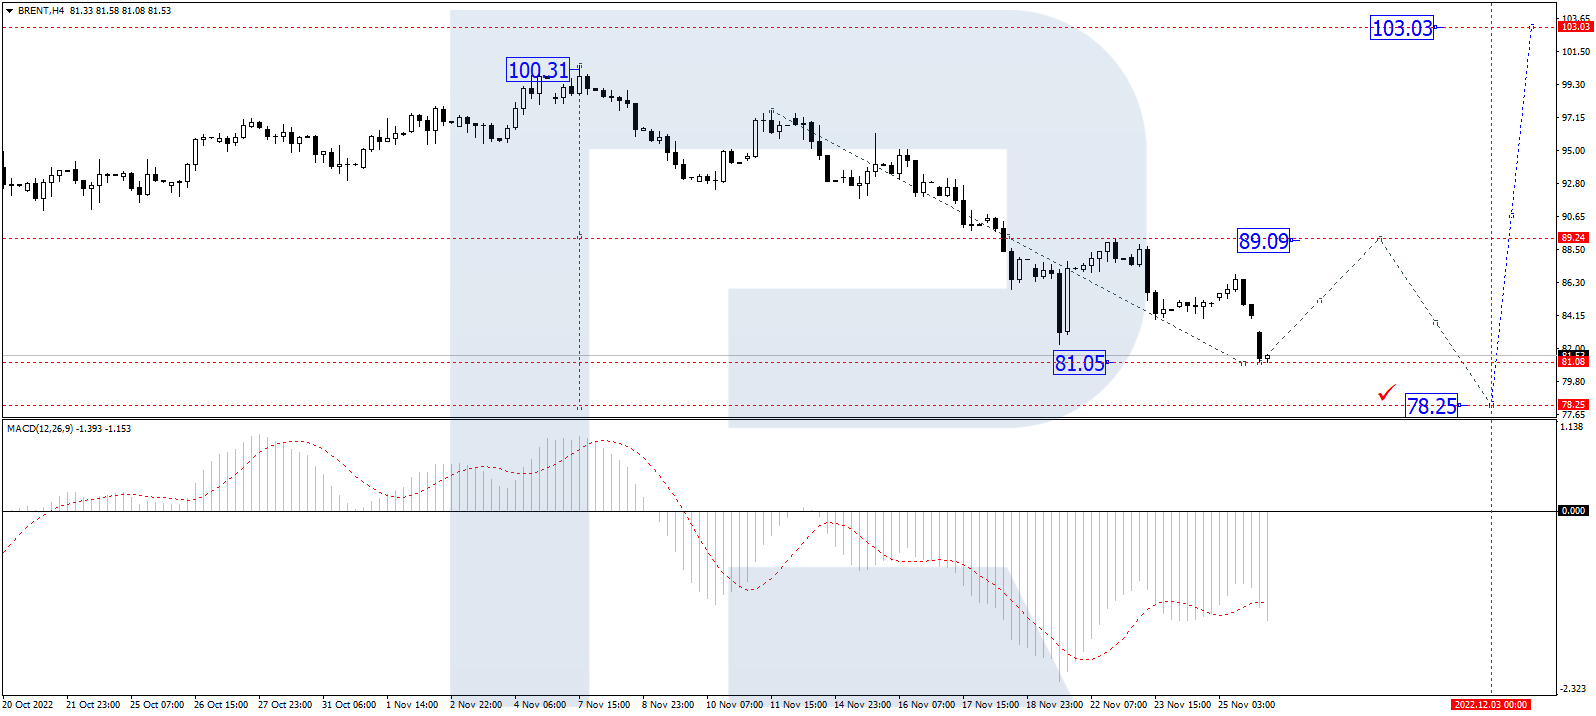 On H4, Brent has completed a wave of decline to 81.05